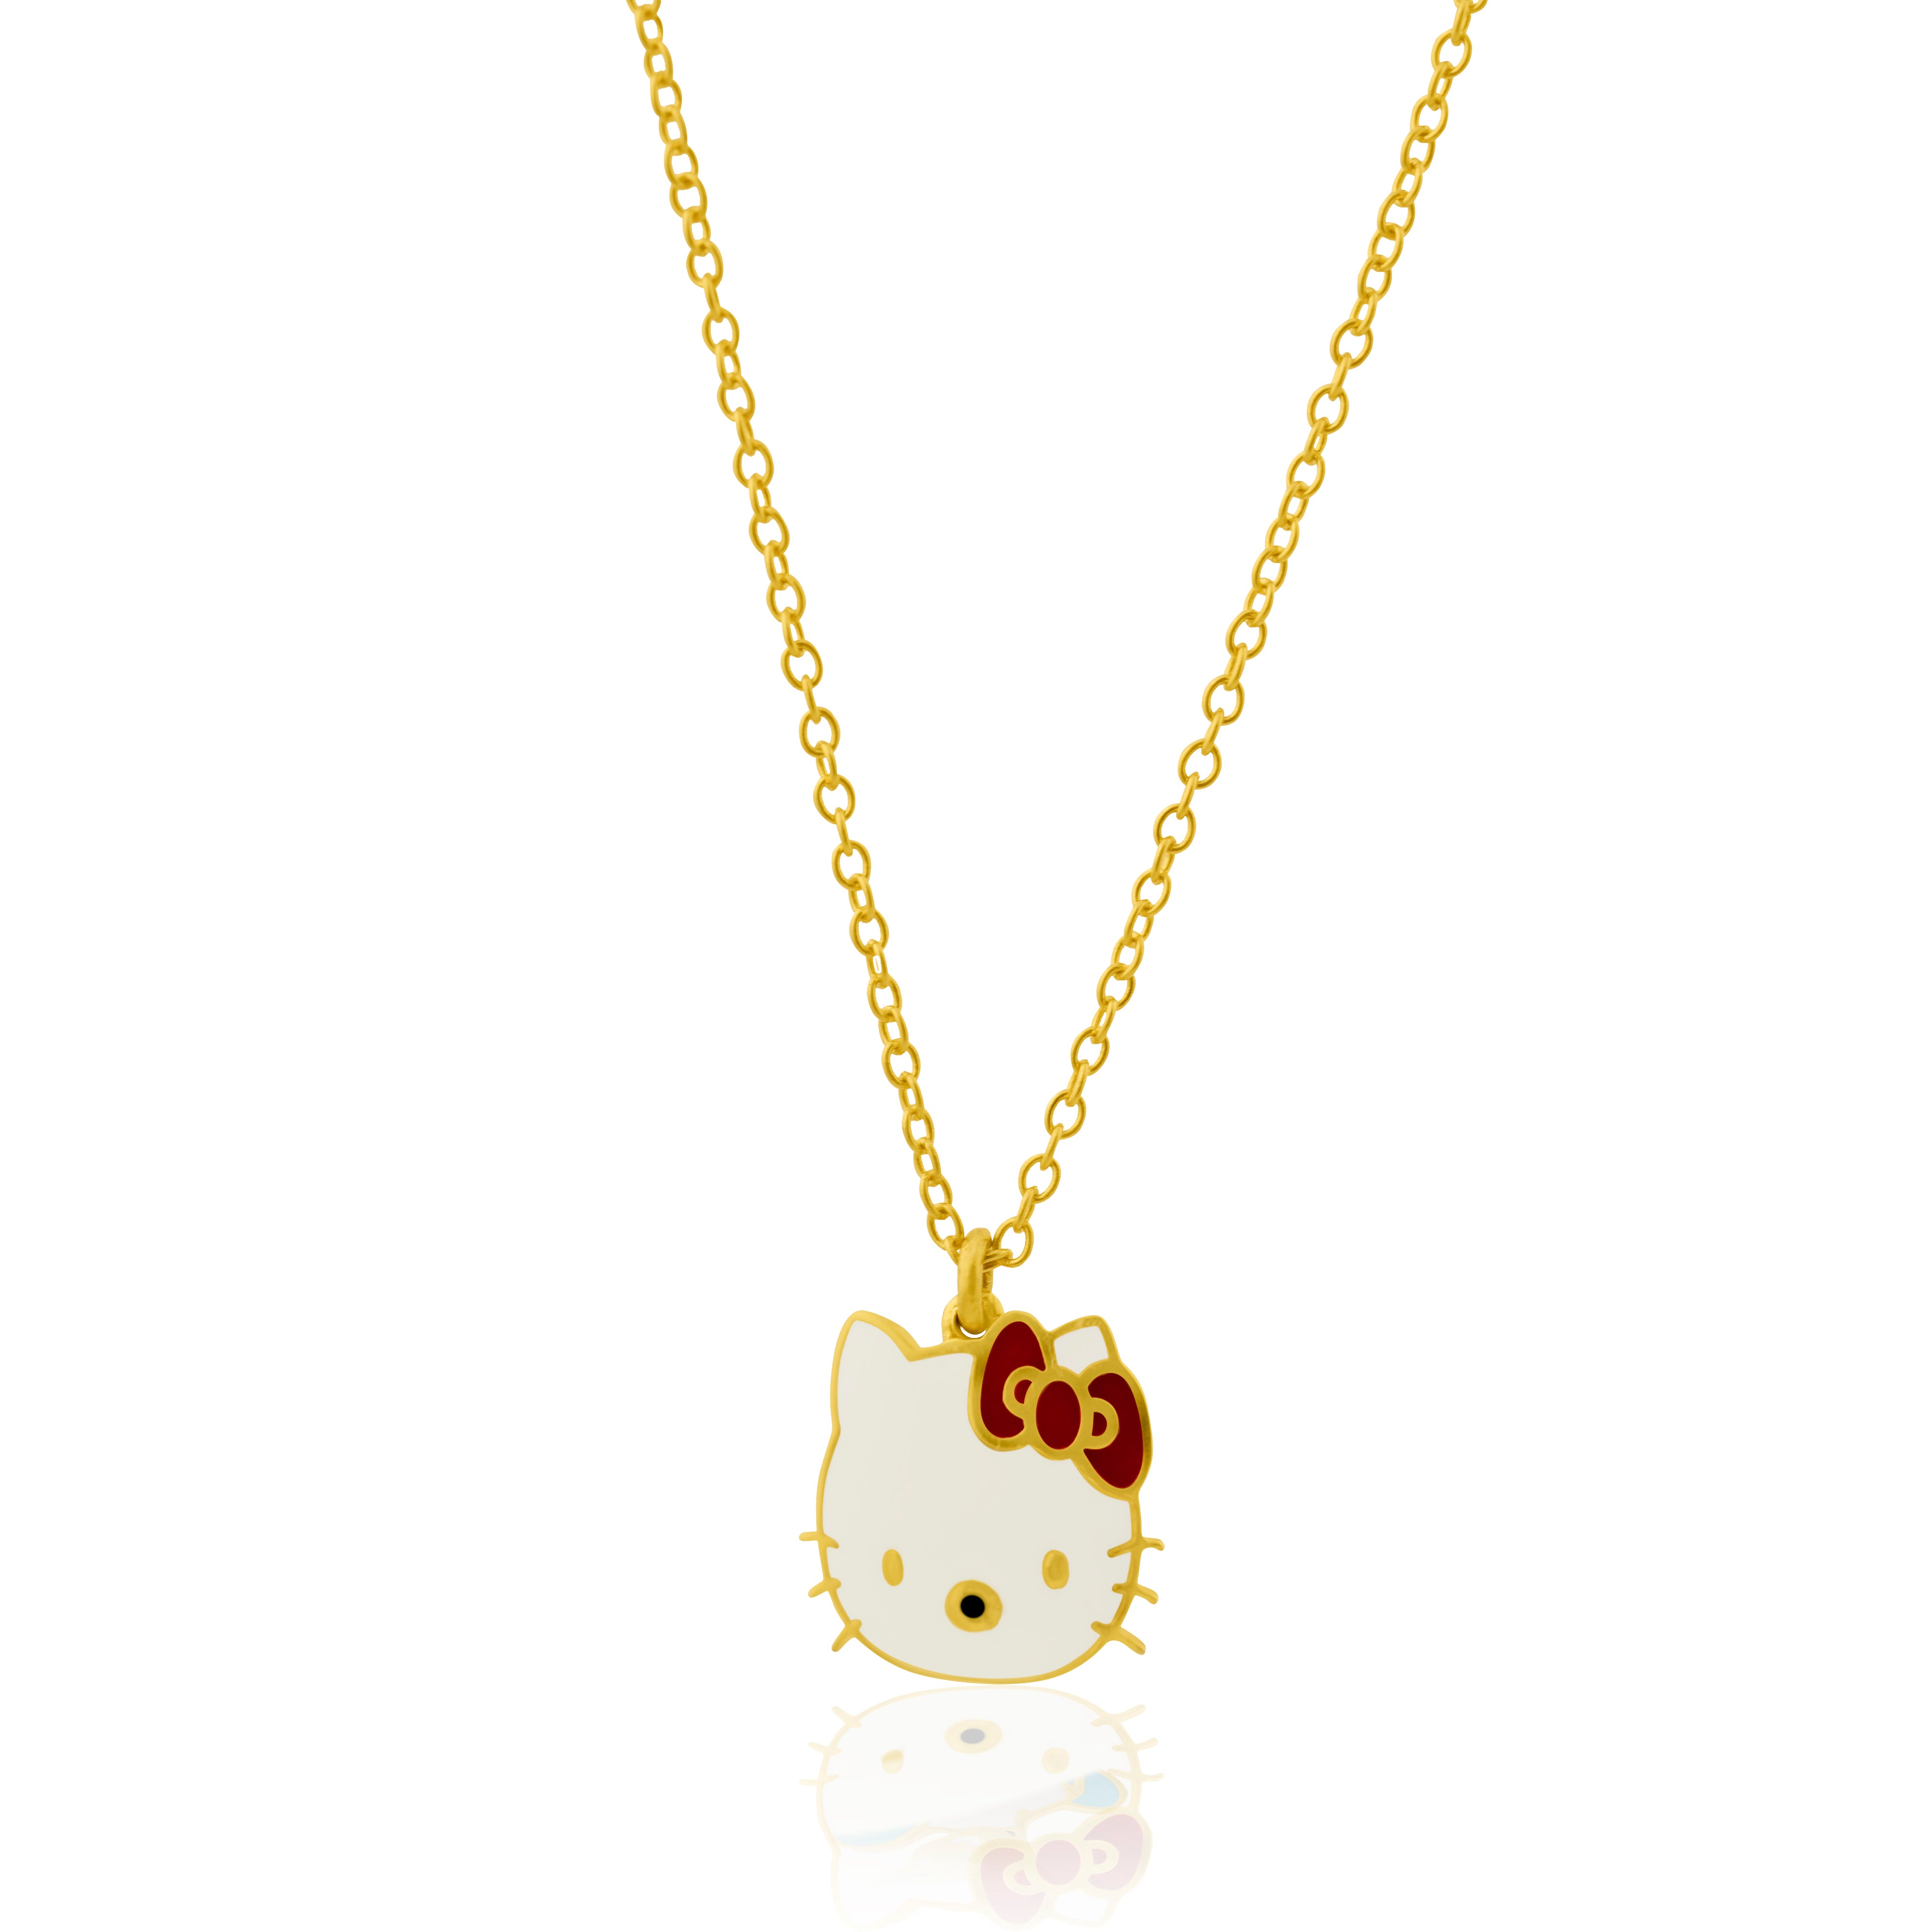 The Kitty Couture Necklace: A Stylish Enamel Pendant and Chain